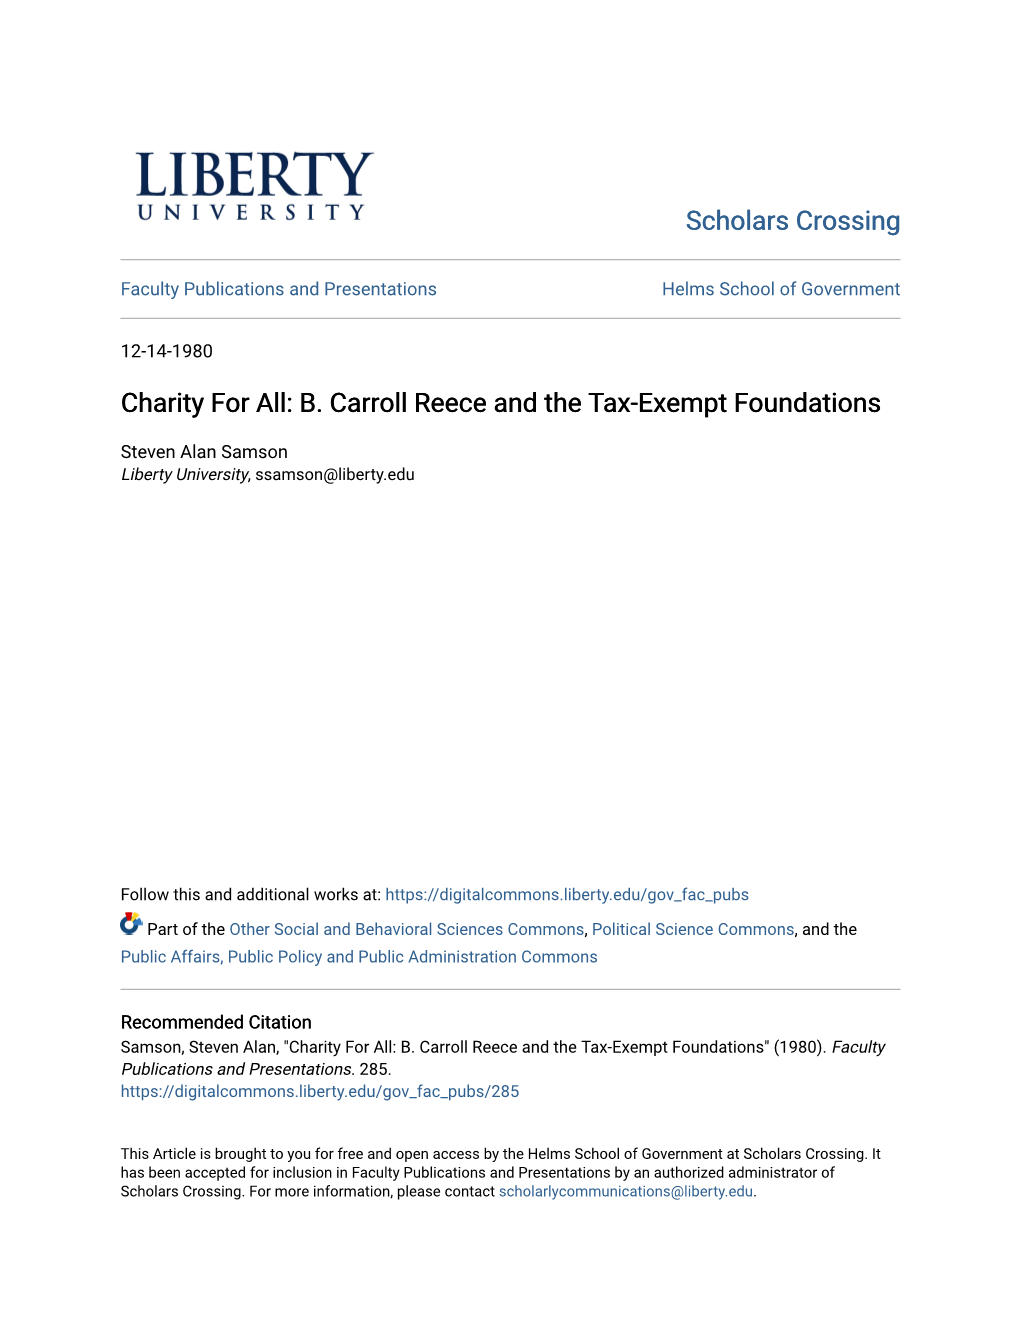 B. Carroll Reece and the Tax-Exempt Foundations